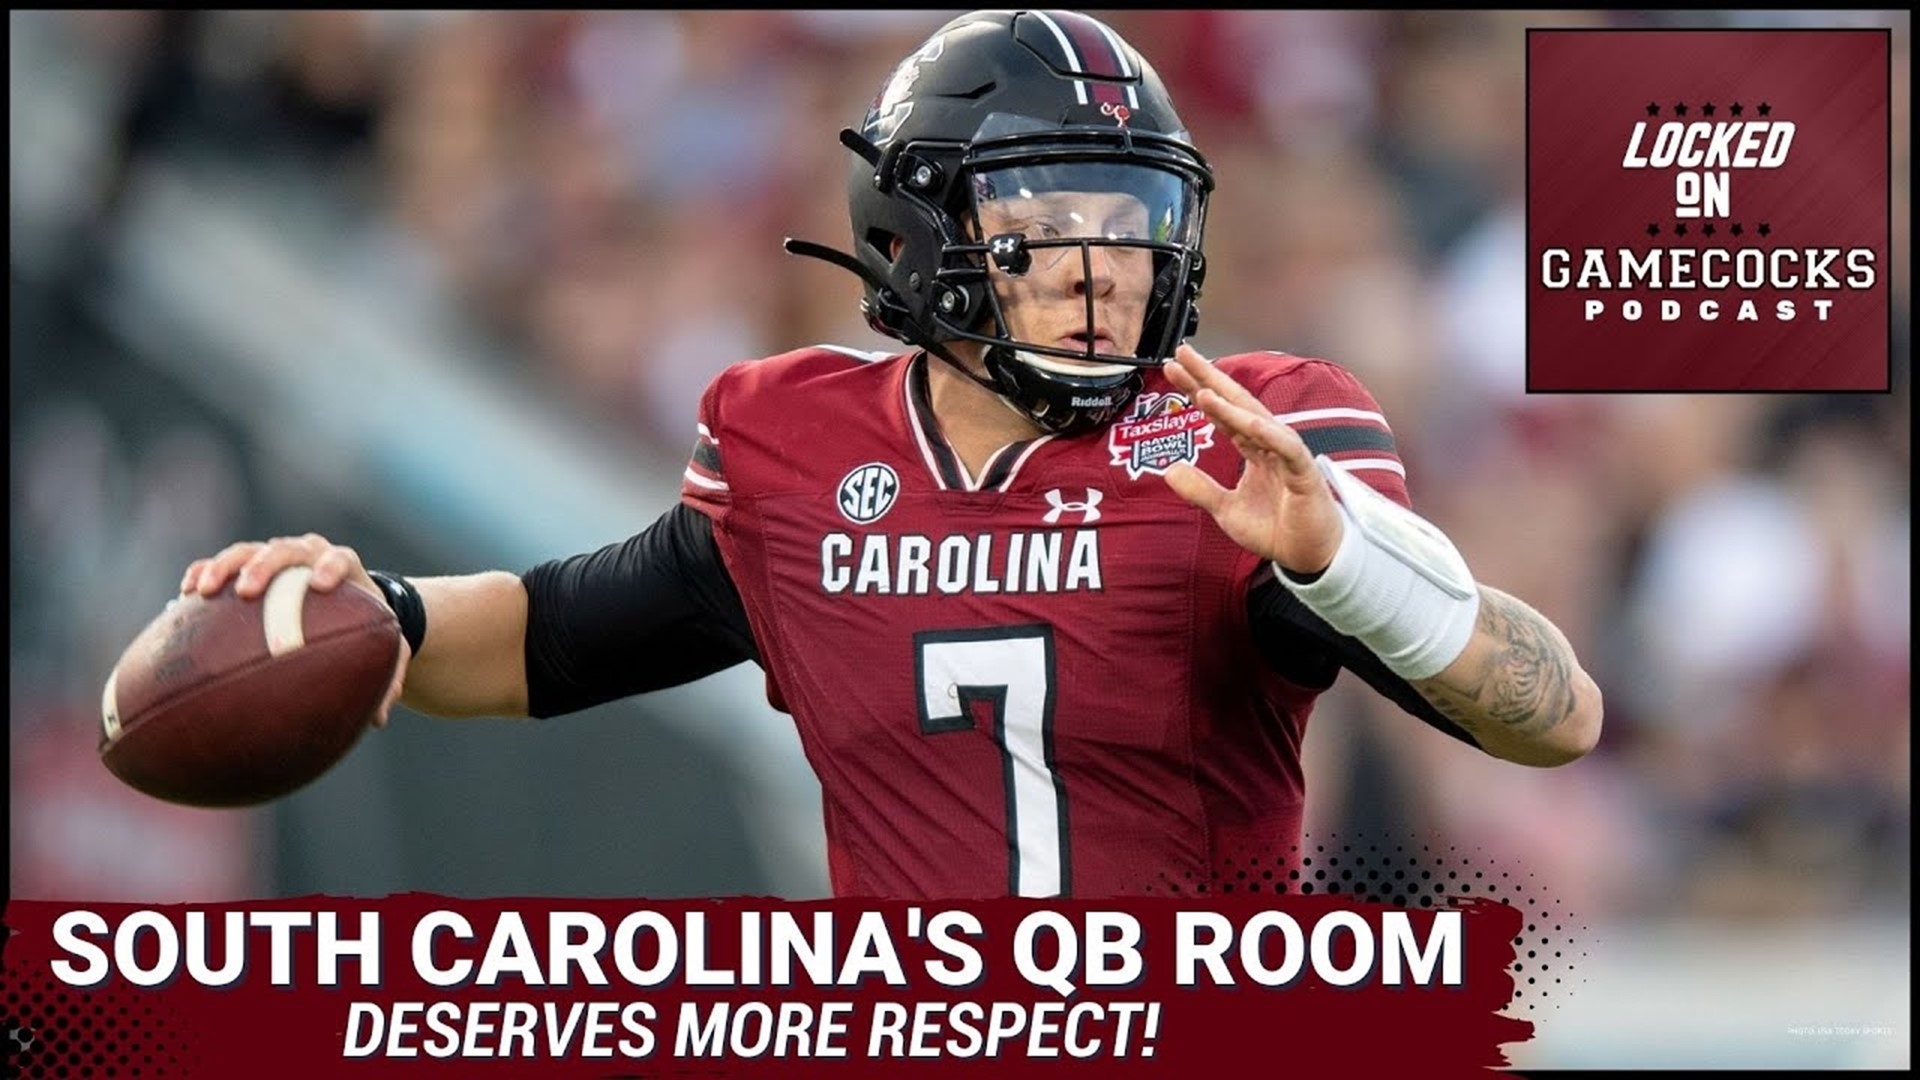 Shane Beamer & Co. Possess A Top 5 QB Room In The Southeastern Conference! | South Carolina Football